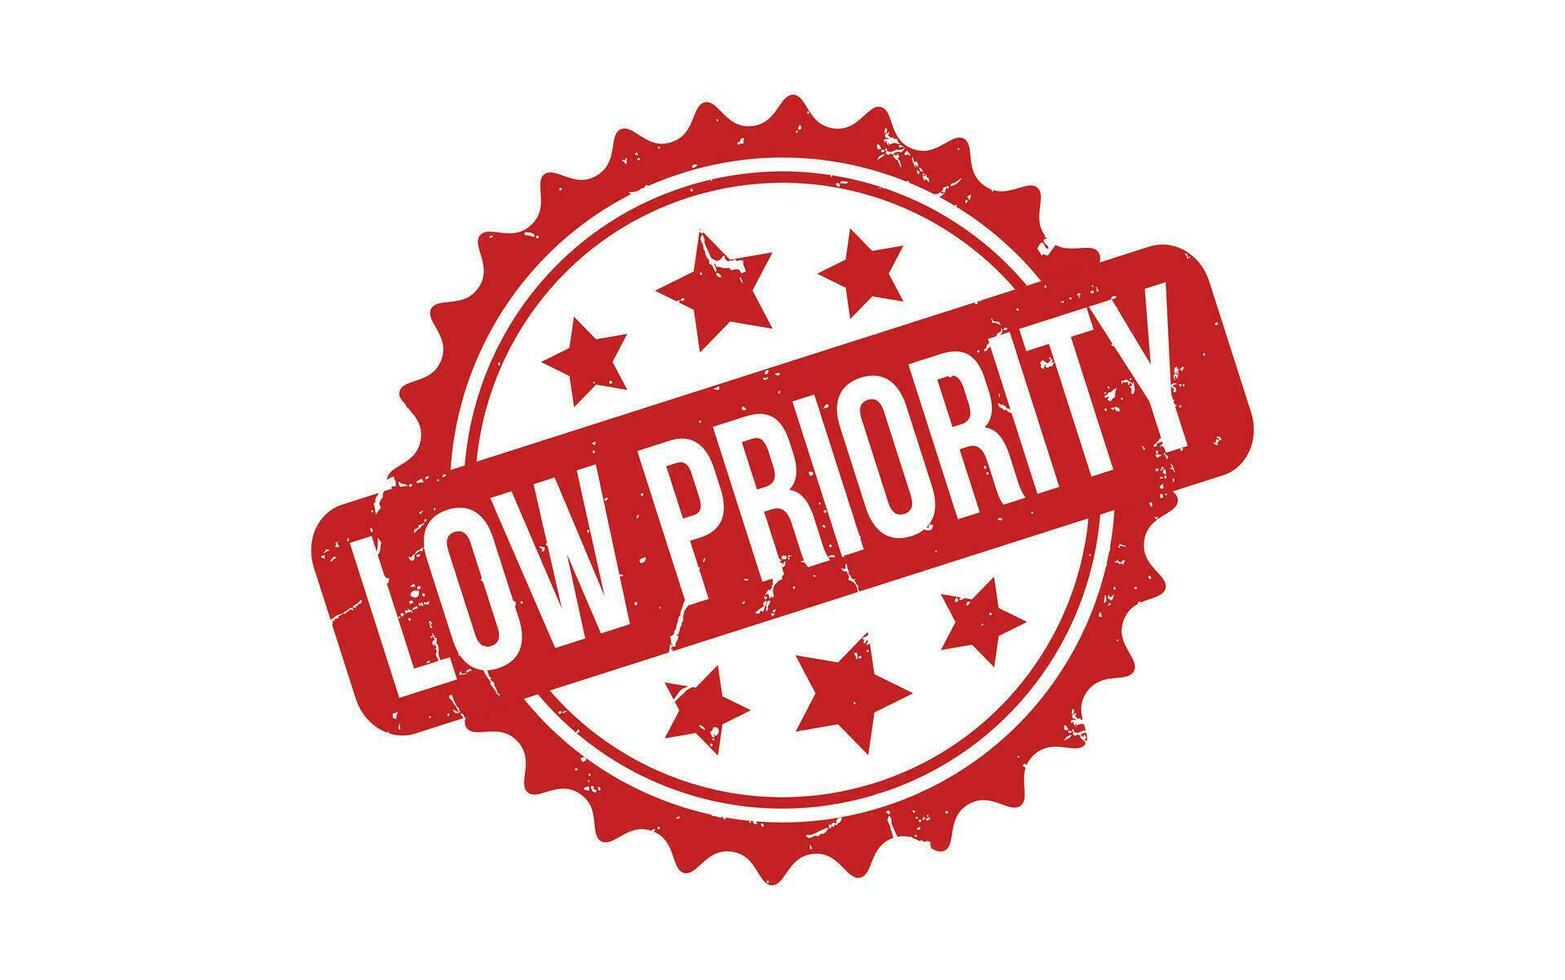 Low Priority rubber grunge stamp seal vector